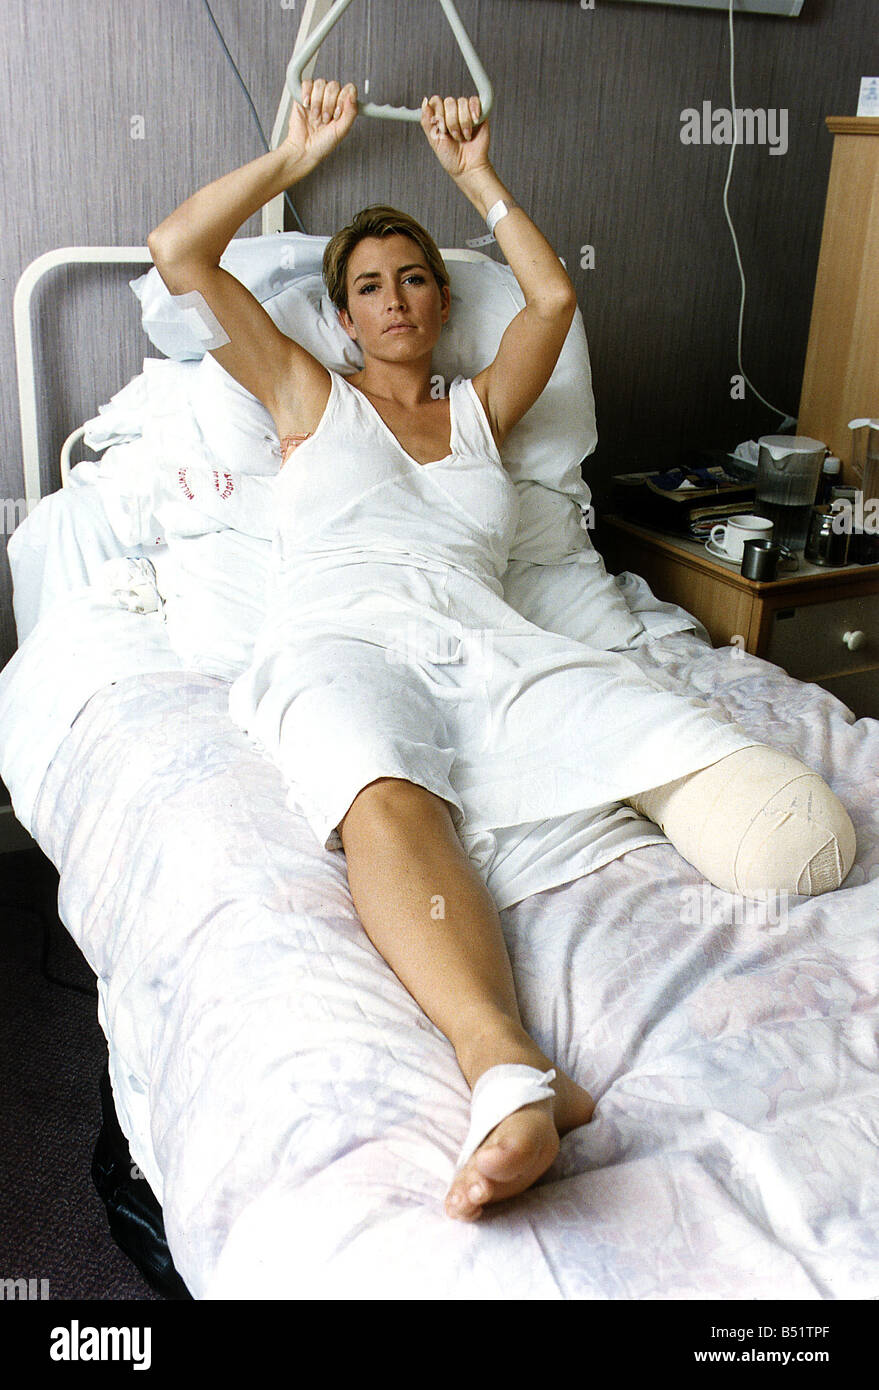 heather-mills-model-who-lost-her-leg-in-